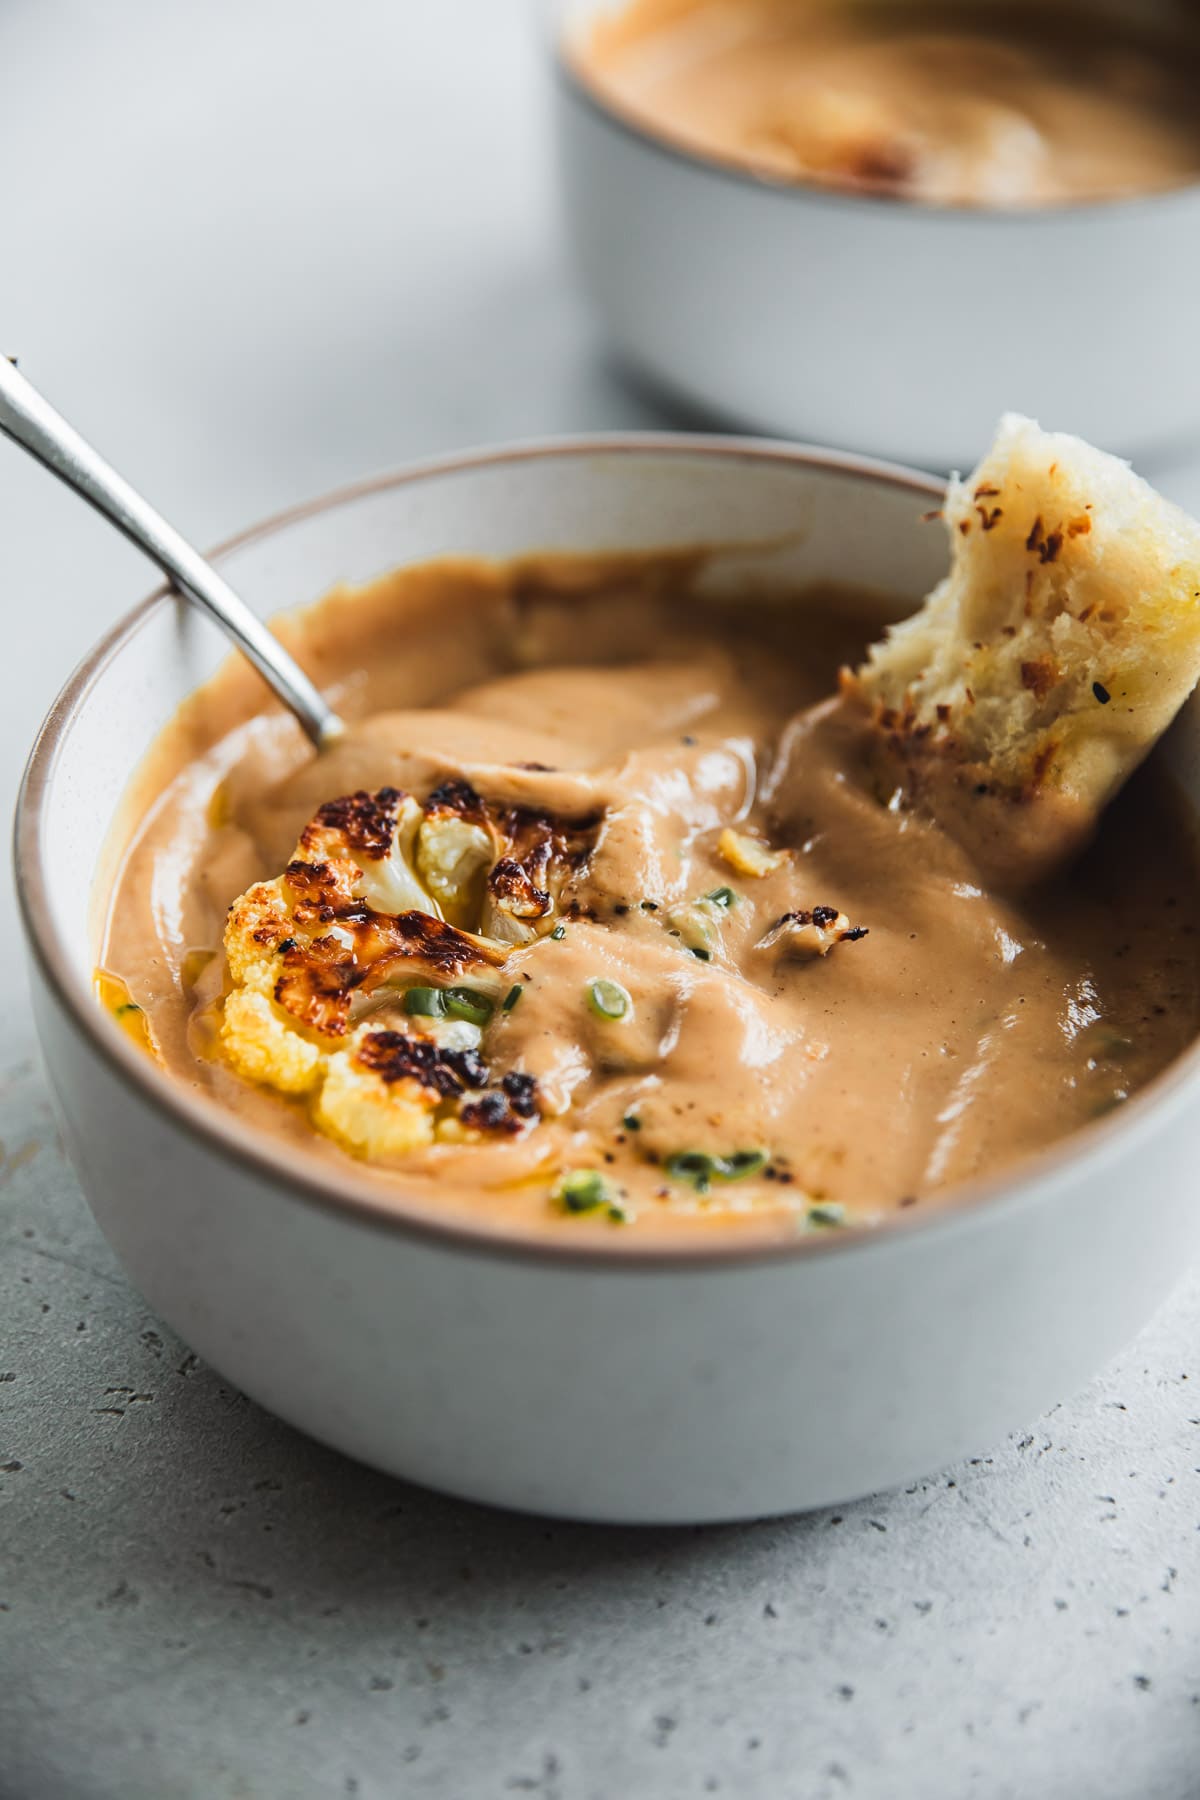 Thick, creamy roasted cauliflower soup in a bowl with a spoon and toasted bread stick.